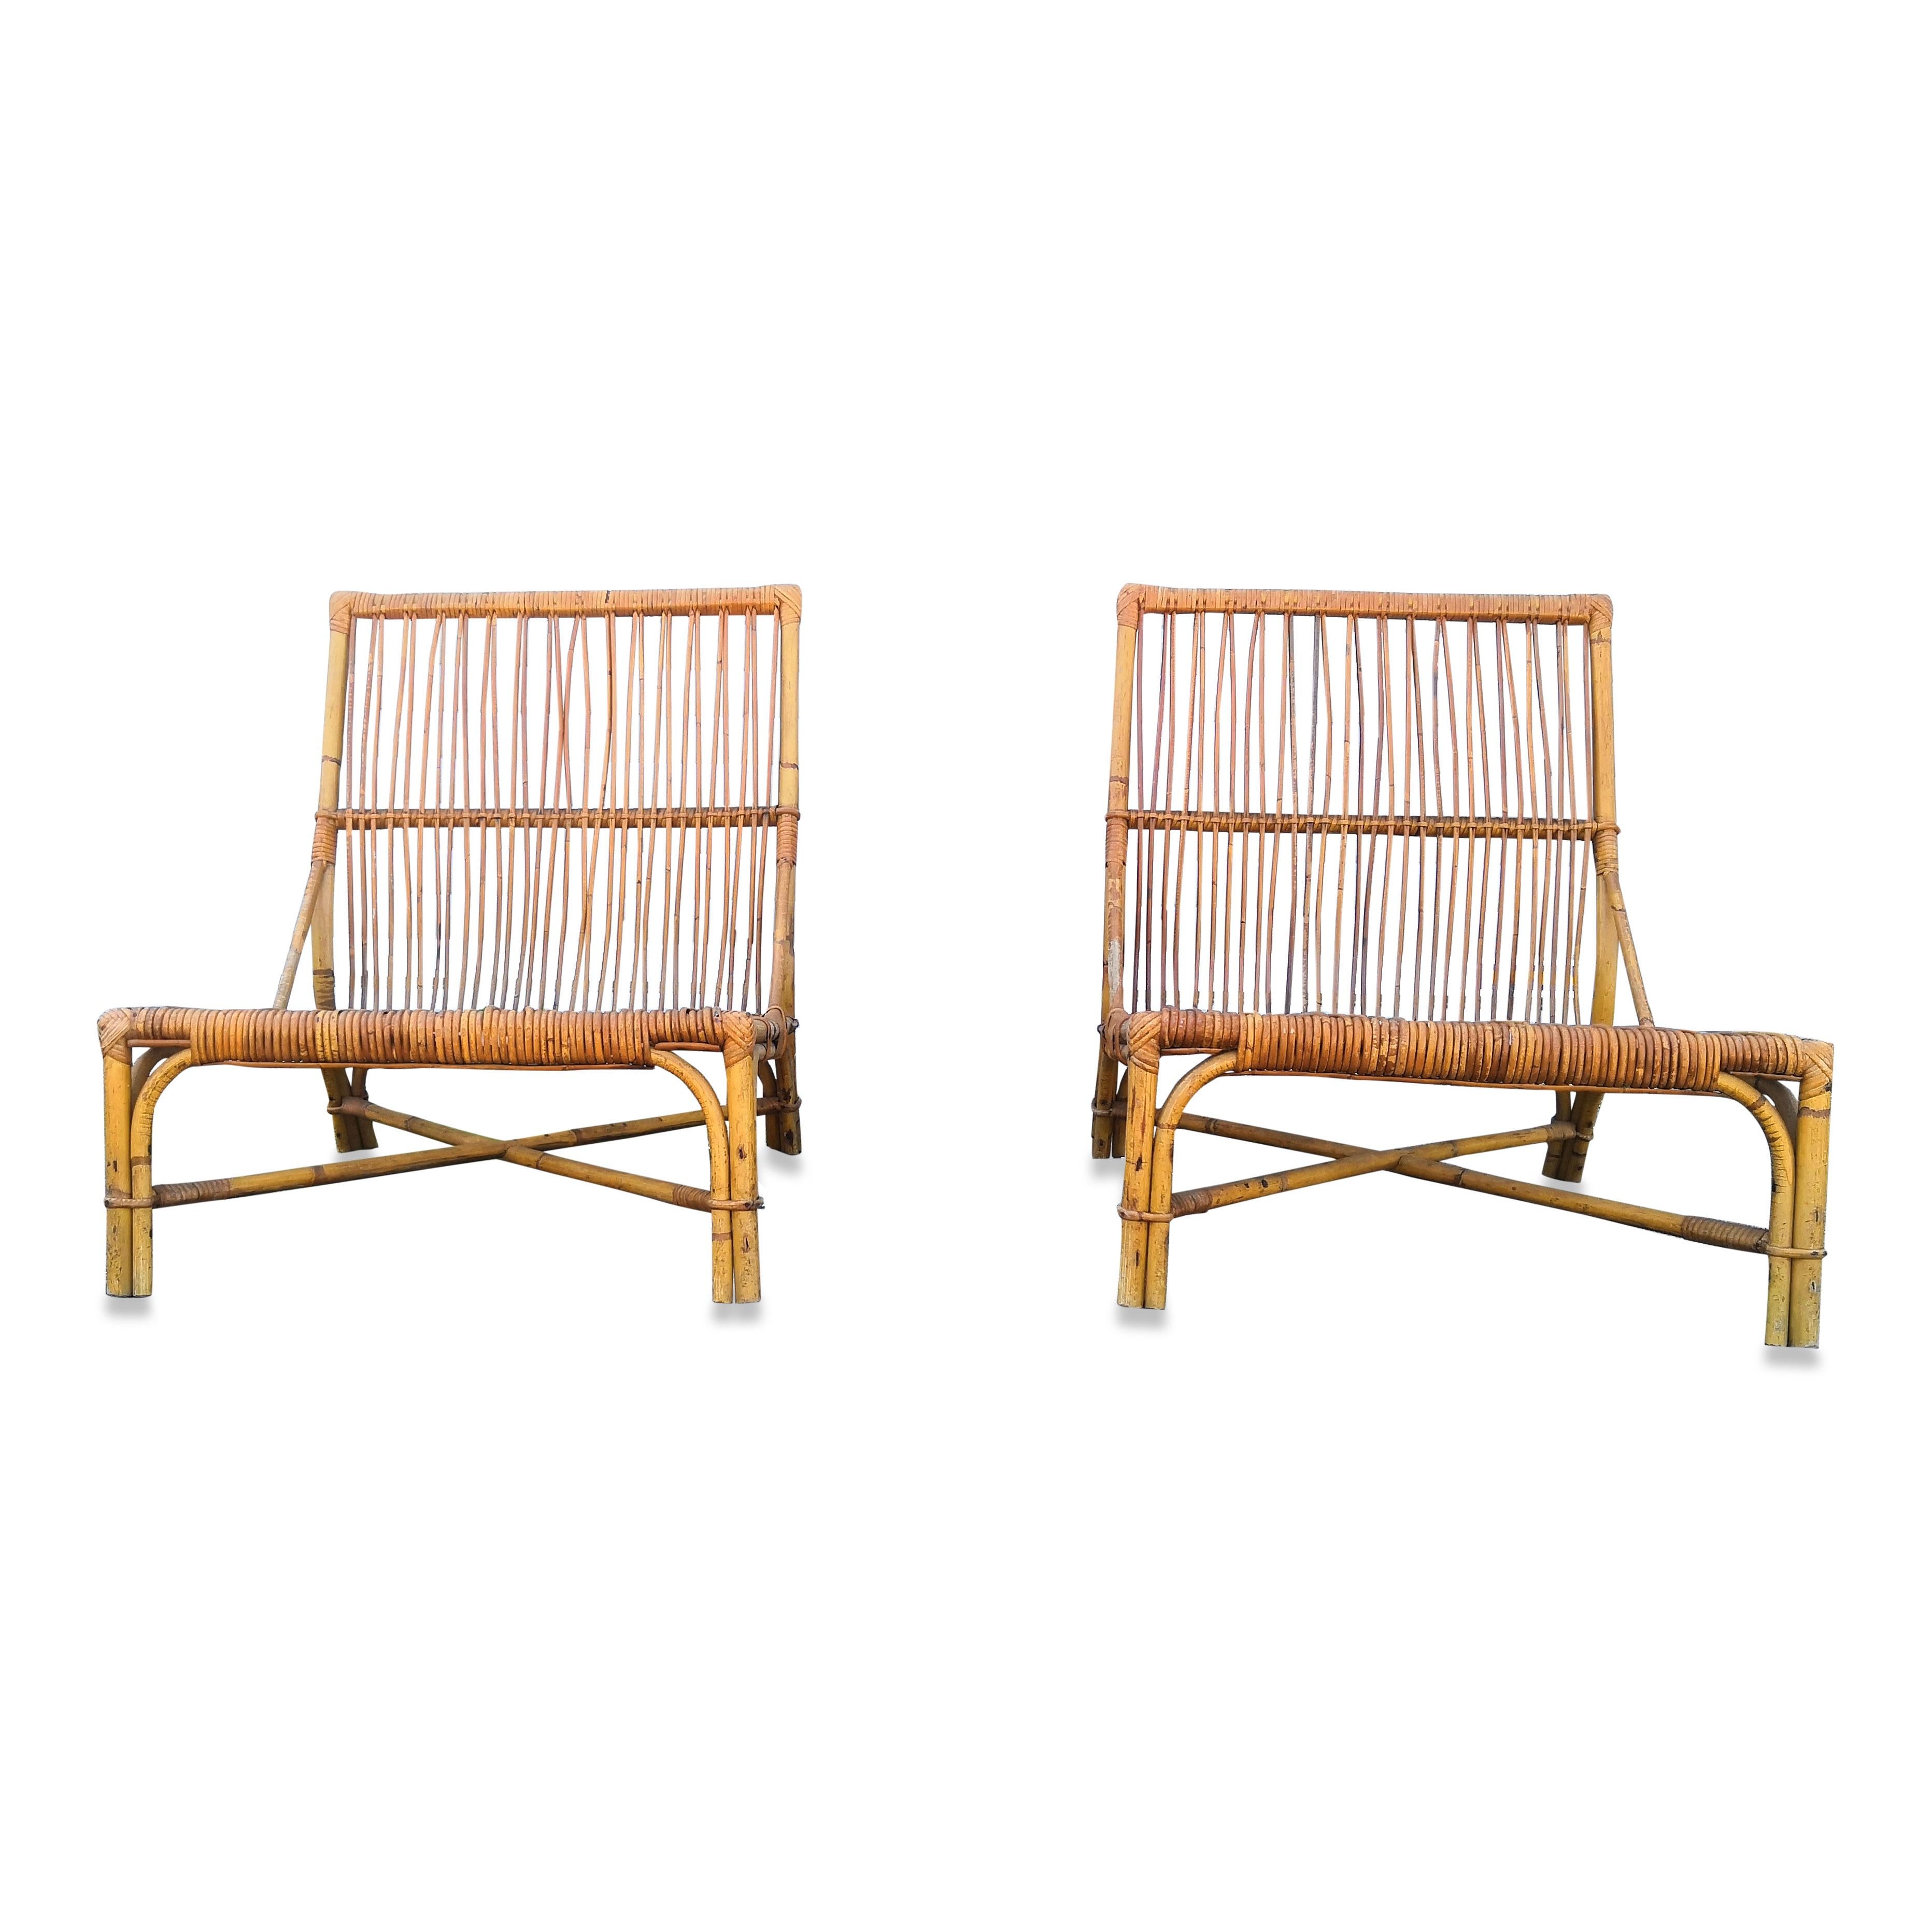 Elegant pair of slipper chairs
Outdoor use possible
Signature tag on both chairs
Good vintage condition
Third chair available.
These chairs will ship from France, price does not include shipping nor possible customs related charges.
 